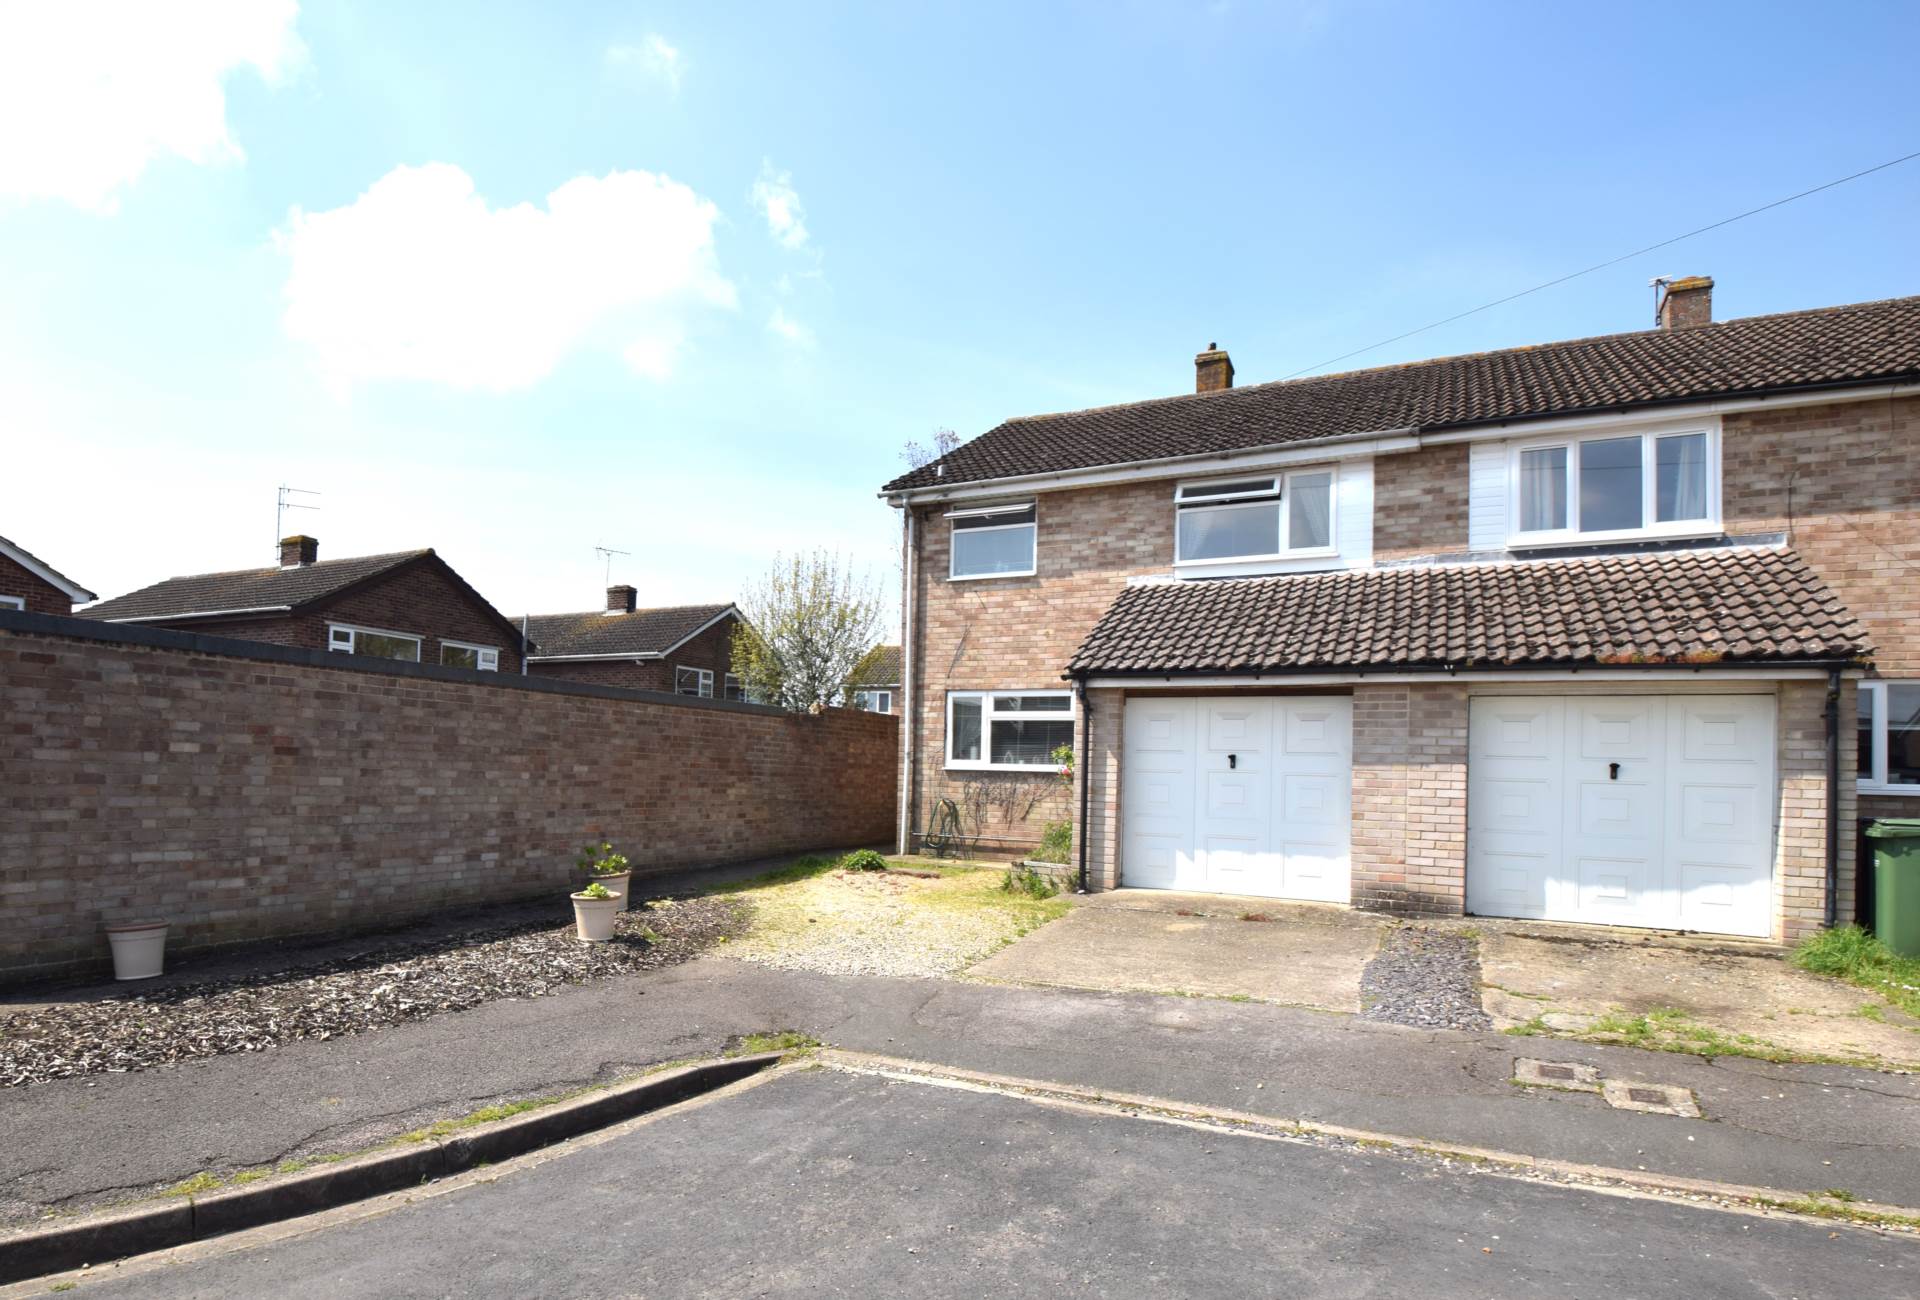 Orchard Close, Chalgrove, Image 25